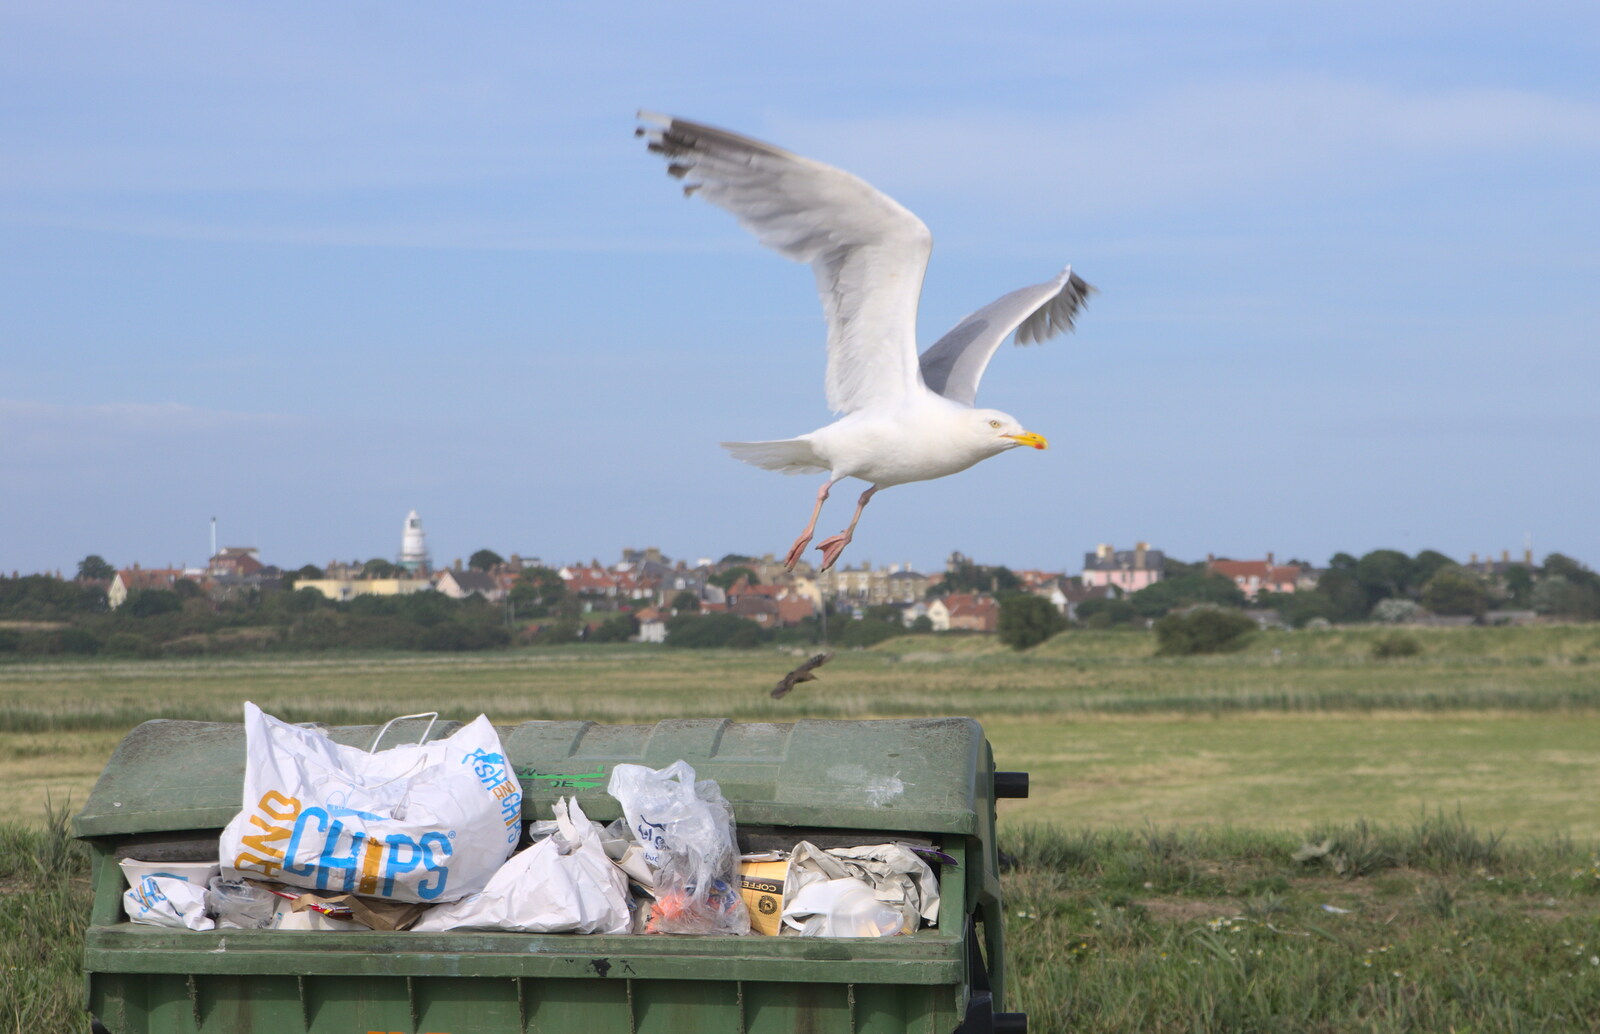 The herring hull takes flight from the bins from The Danger of Trees: A Camping (Mis)adventure - Southwold, Suffolk - 3rd August 2015